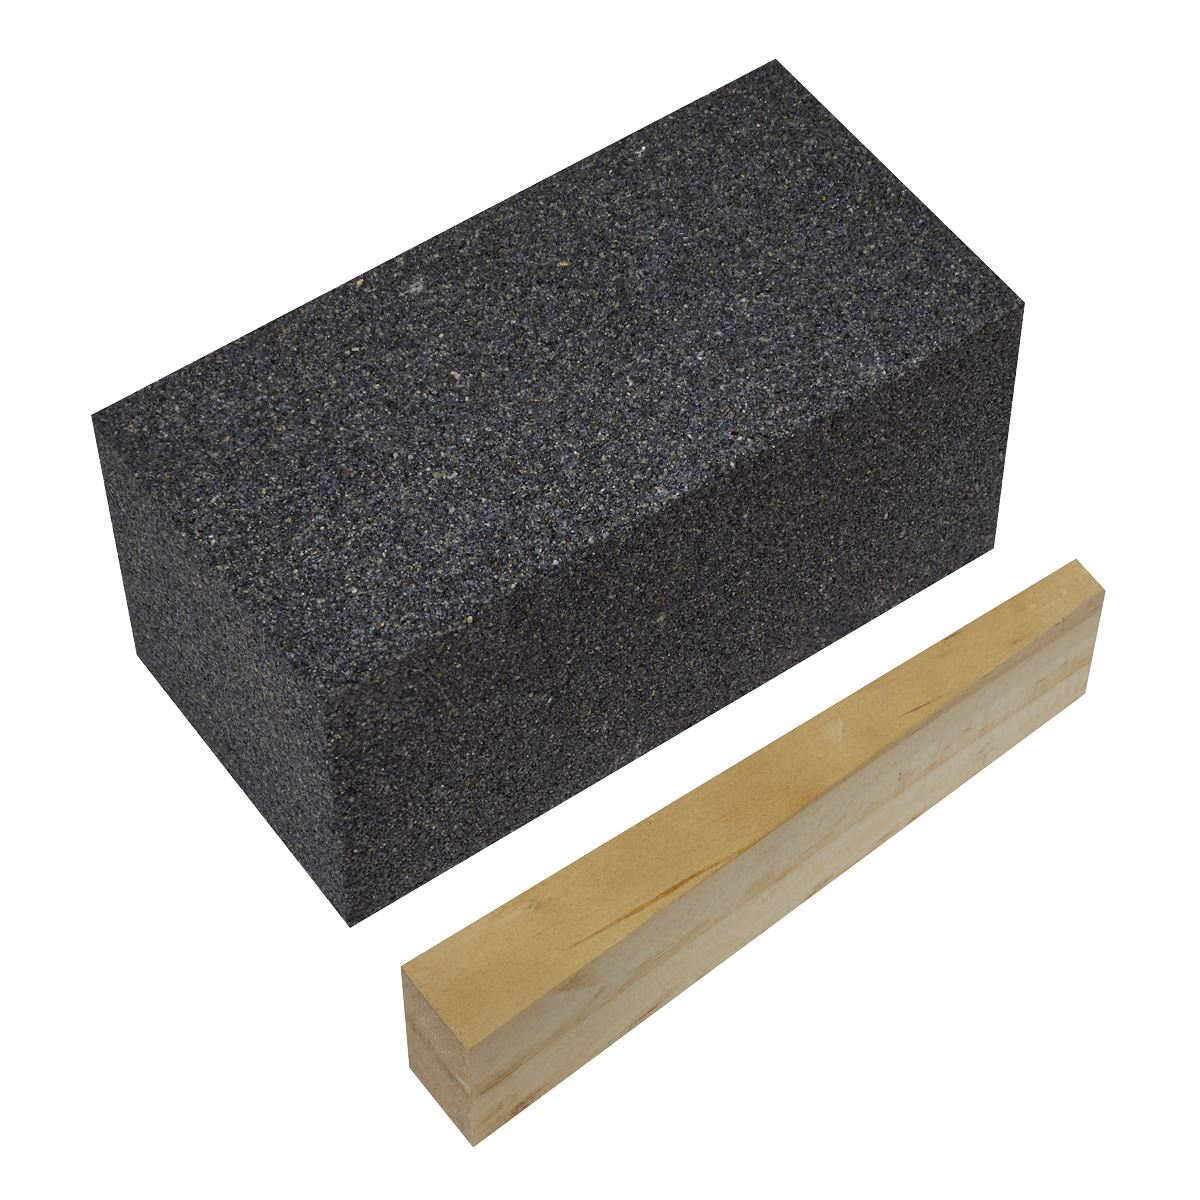 Worksafe by Sealey Floor Grinding Block 50 x 50 x 100mm 12Grit - Pack of 6